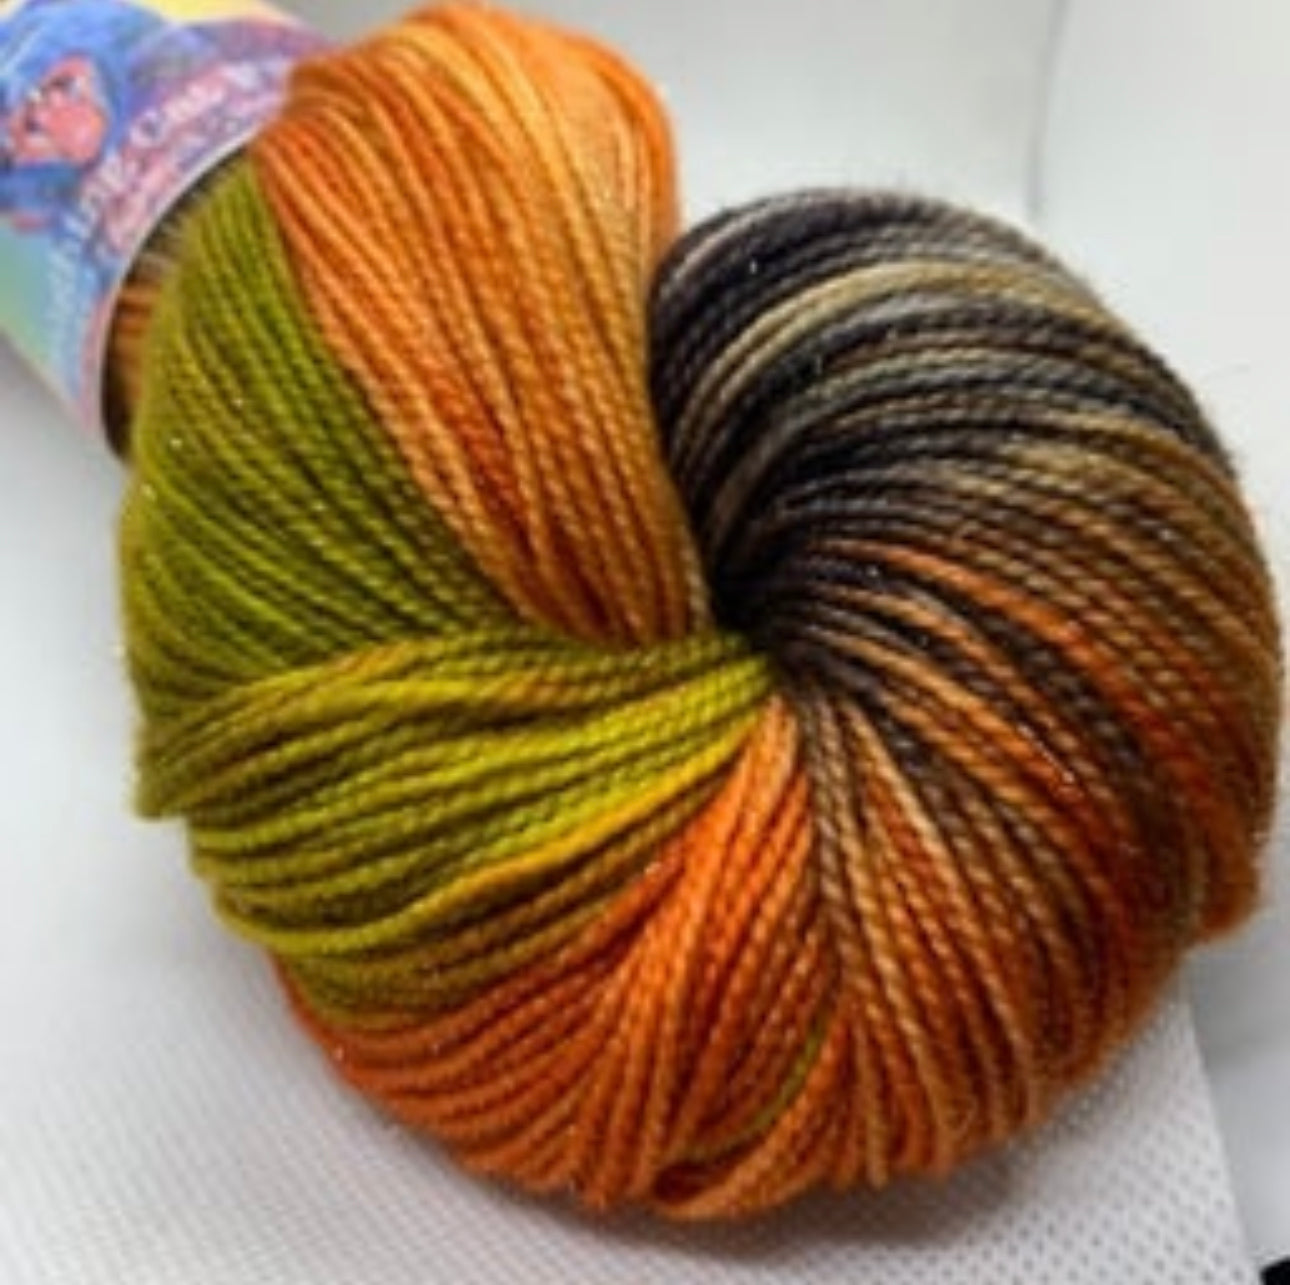 "The Lovers" on Various Yarn Bases